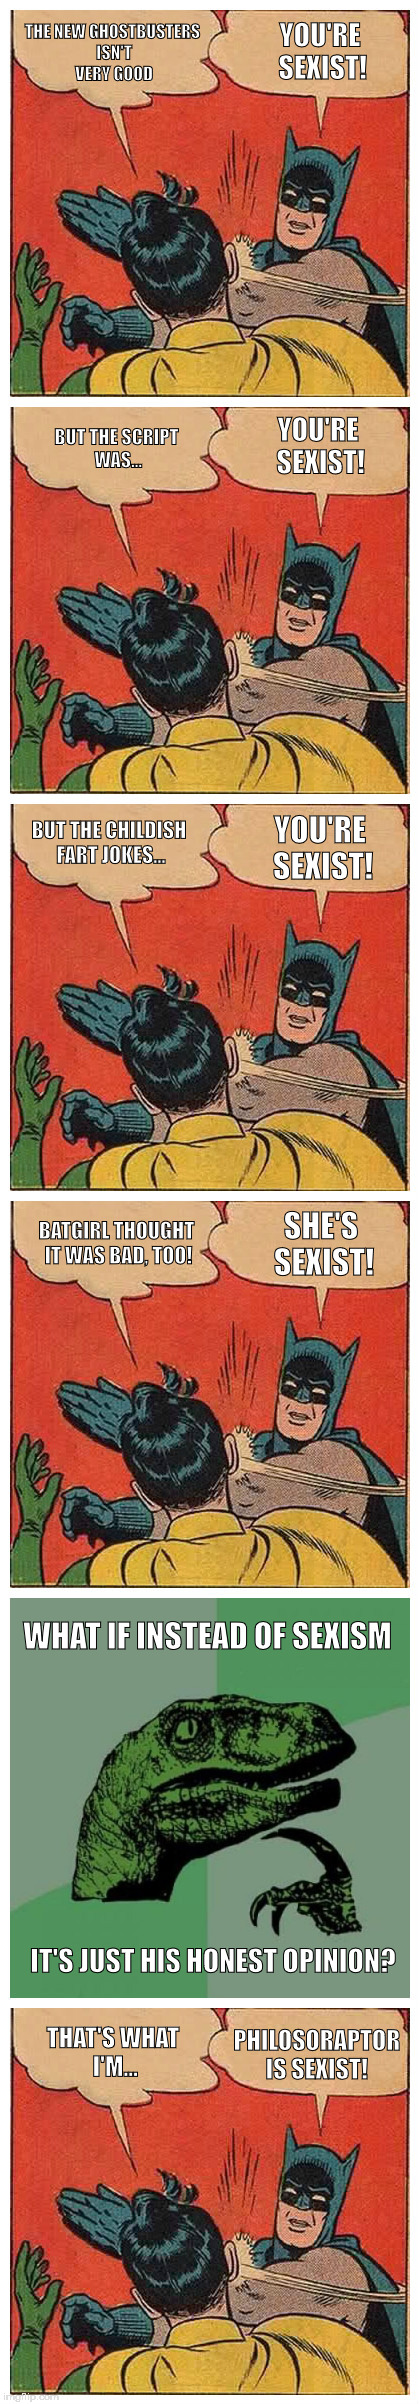 YOU'RE SEXIST! THE NEW GHOSTBUSTERS ISN'T VERY GOOD; BUT THE SCRIPT WAS... YOU'RE SEXIST! BUT THE CHILDISH FART JOKES... YOU'RE SEXIST! SHE'S SEXIST! BATGIRL THOUGHT IT WAS BAD, TOO! WHAT IF INSTEAD OF SEXISM; IT'S JUST HIS HONEST OPINION? PHILOSORAPTOR IS SEXIST! THAT'S WHAT I'M... | image tagged in sexist robin is sexist | made w/ Imgflip meme maker